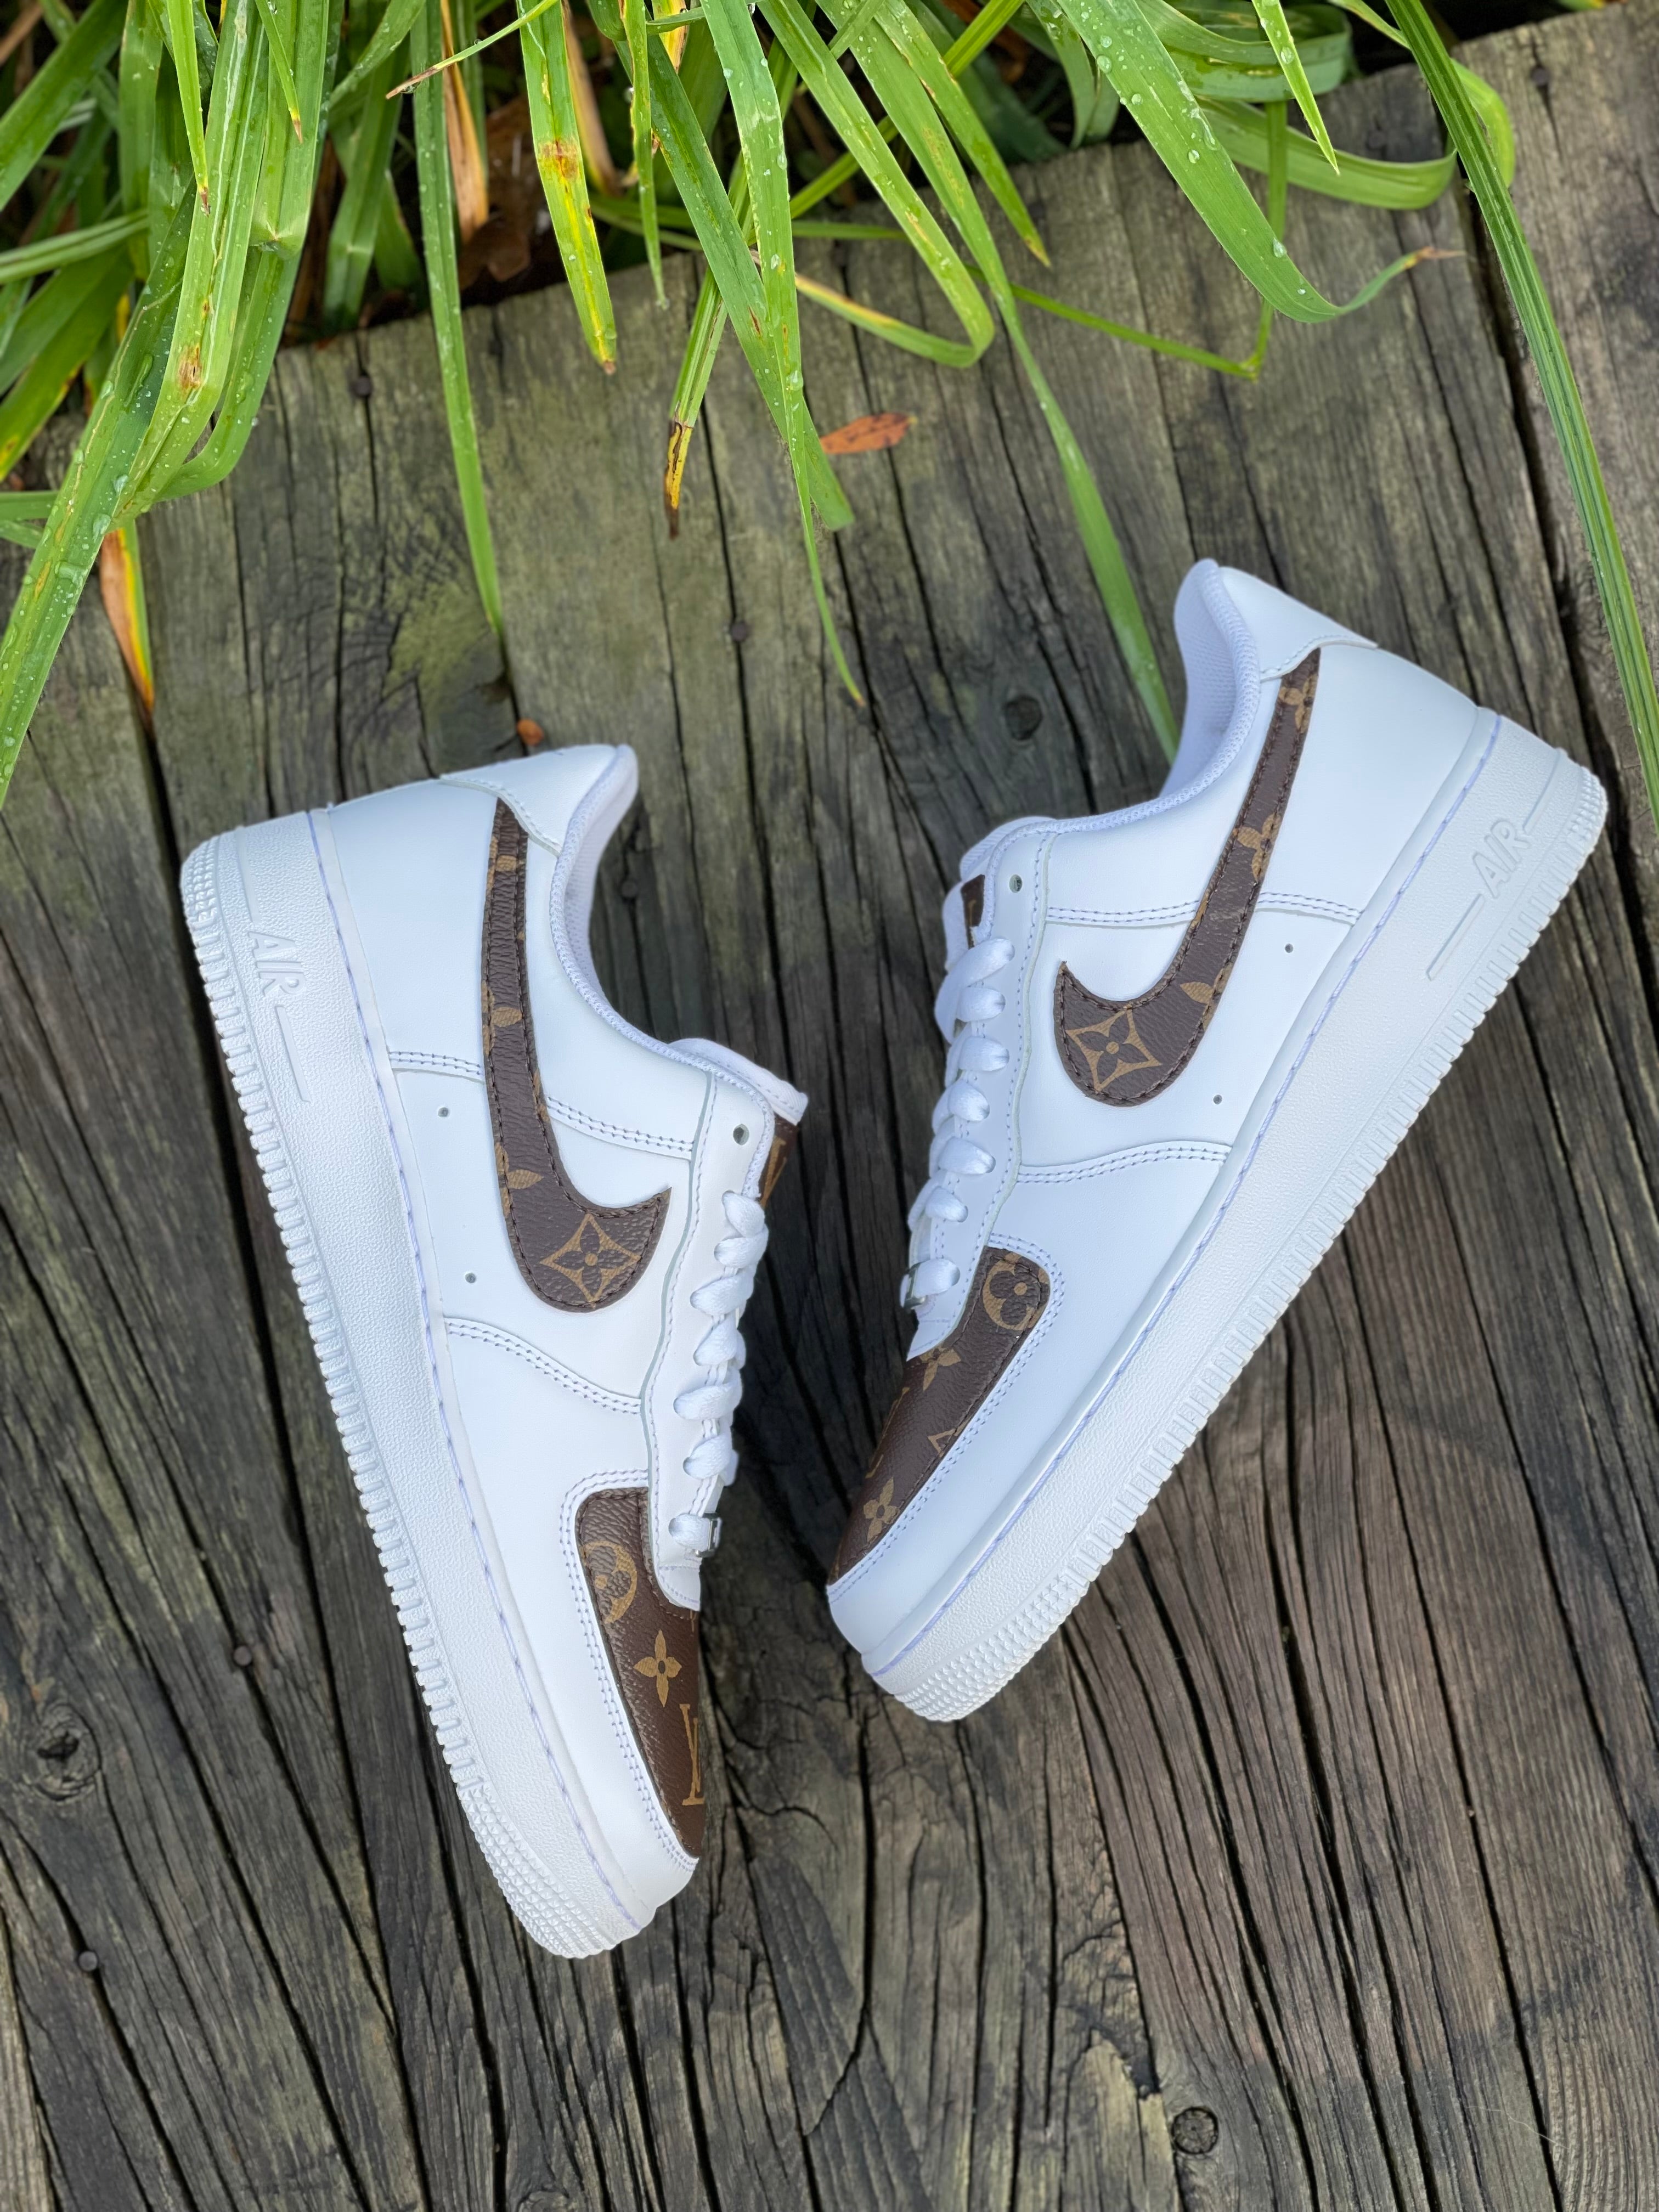 Buy Nike Airforce 1 x Louis Vuitton Shoes Premium Quality, Rs.2399 Only, Free Shipping, InStock, Tts Team